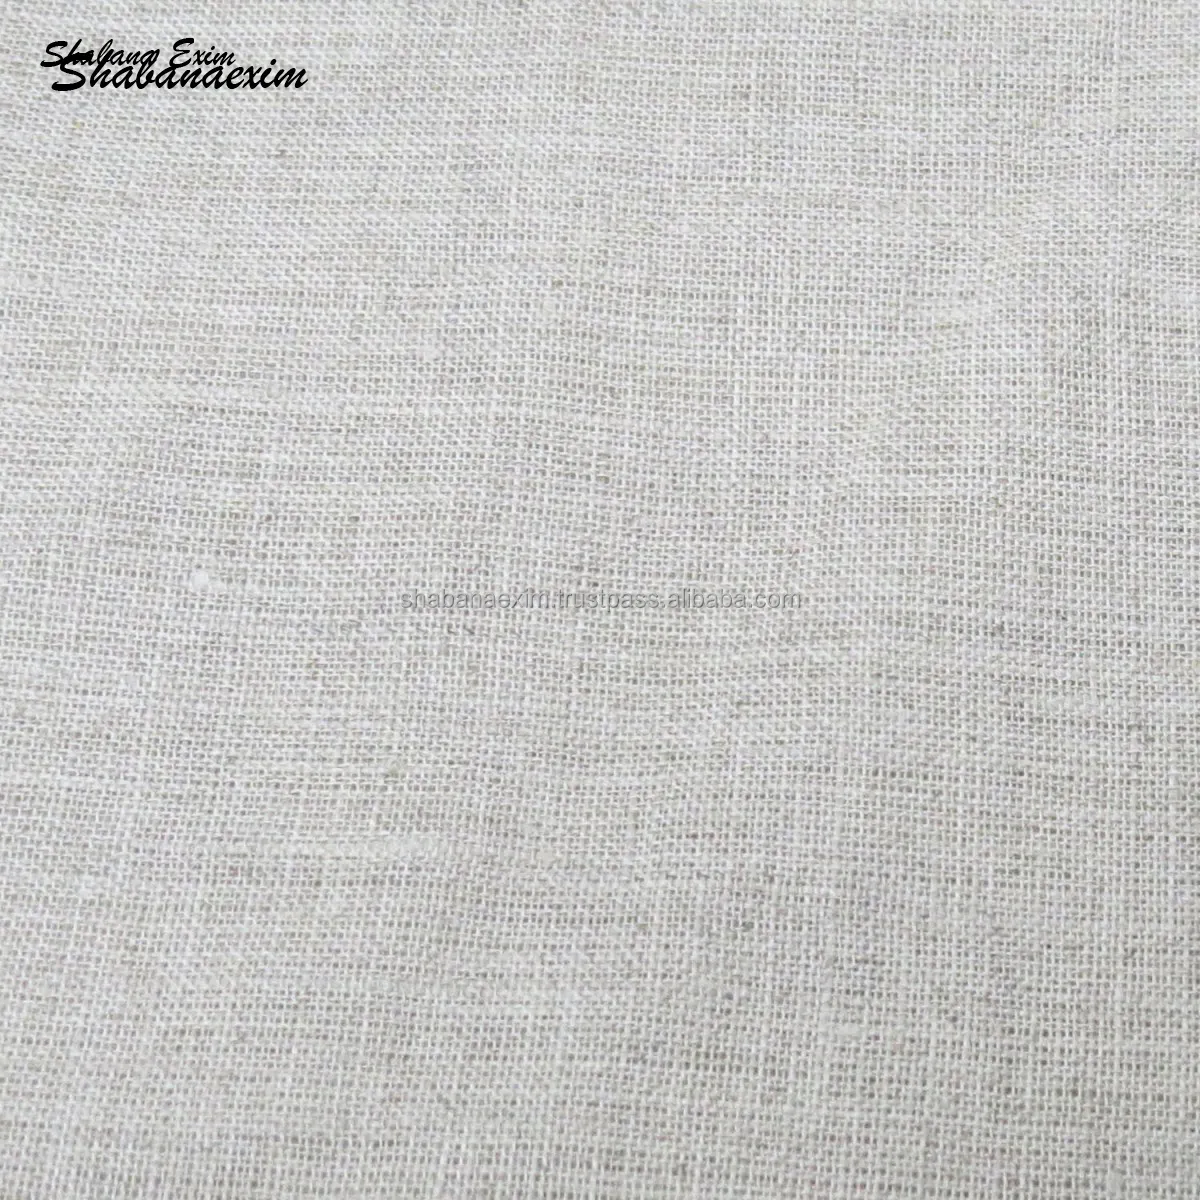 High Quality Soft Fabrics Handloom Outdoor Furniture Fabric Baby Clothing Curtain Woven Cotton Fabric Wholesale